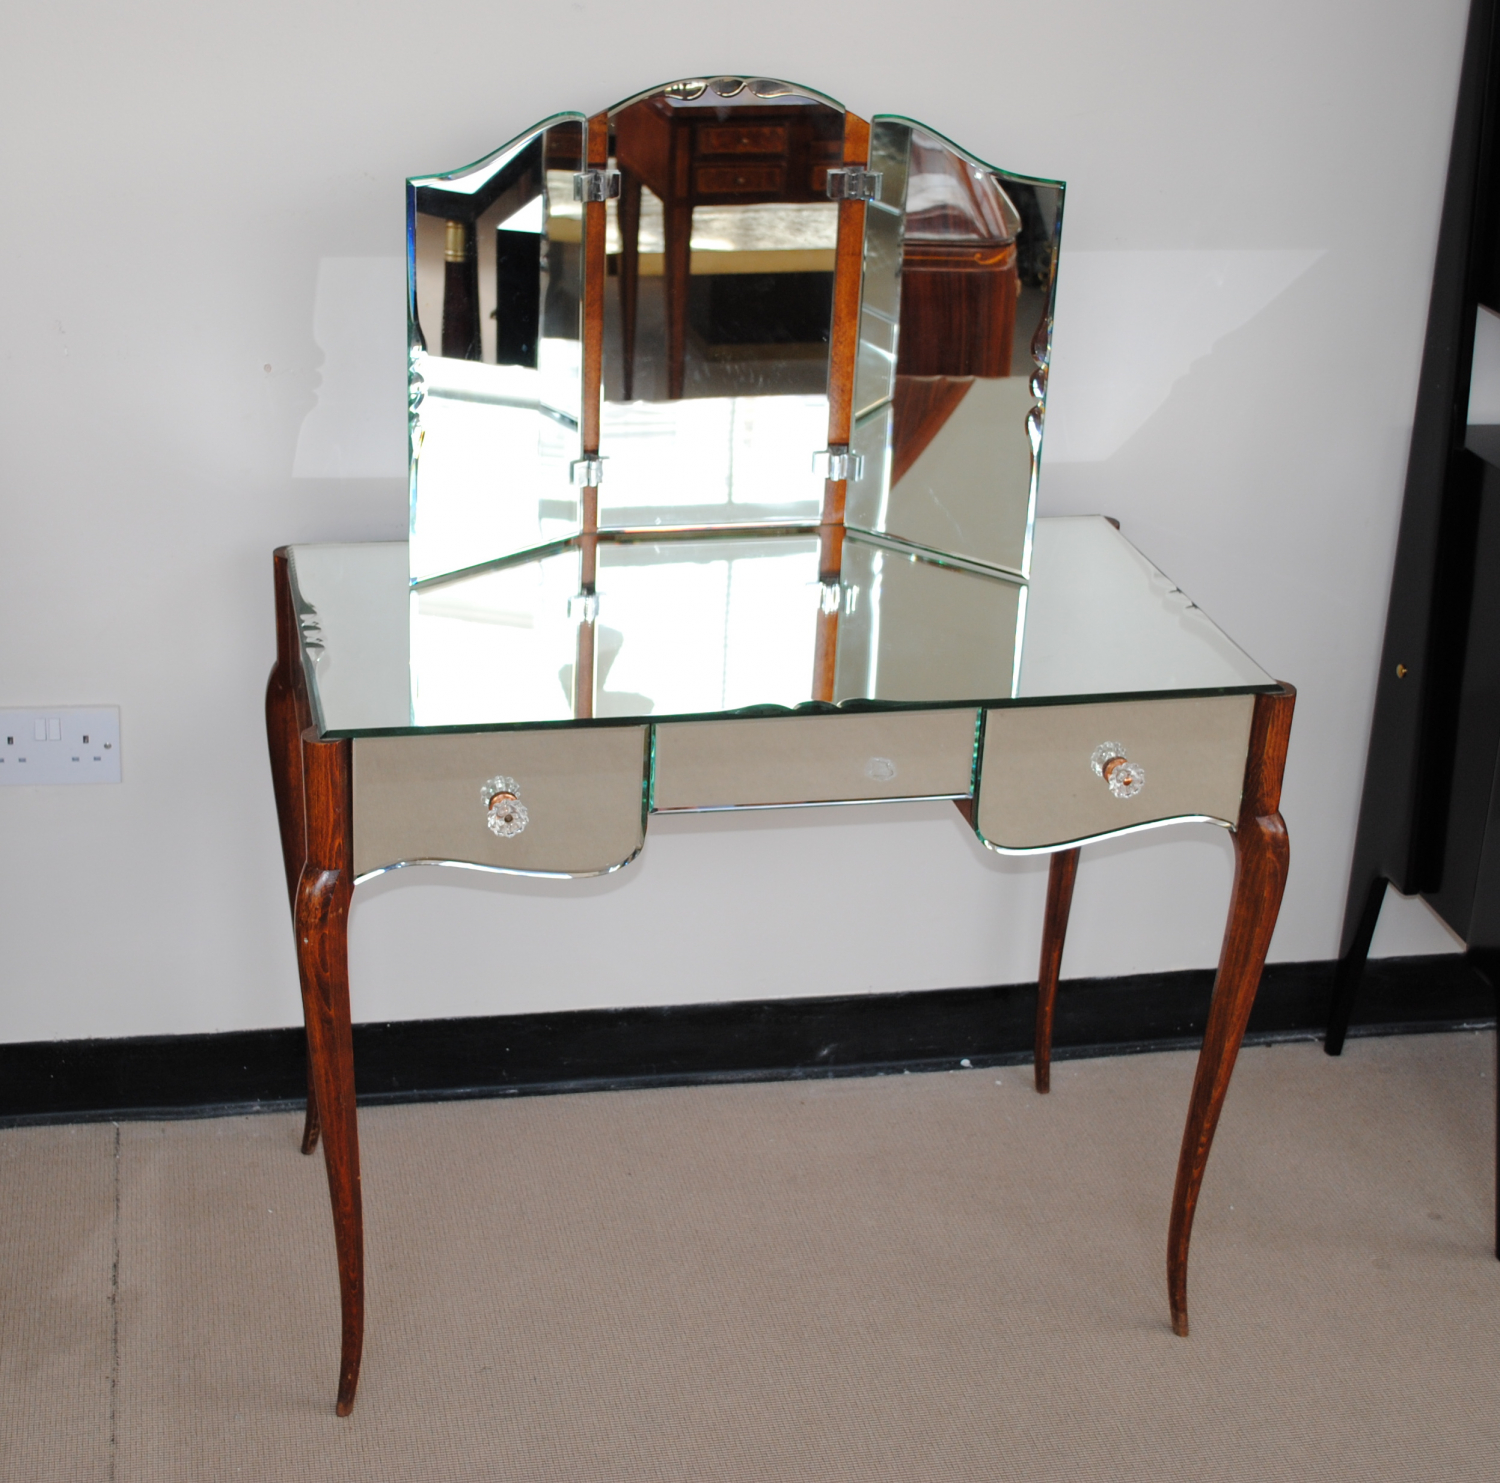 Art deco mirrored Dressing Table